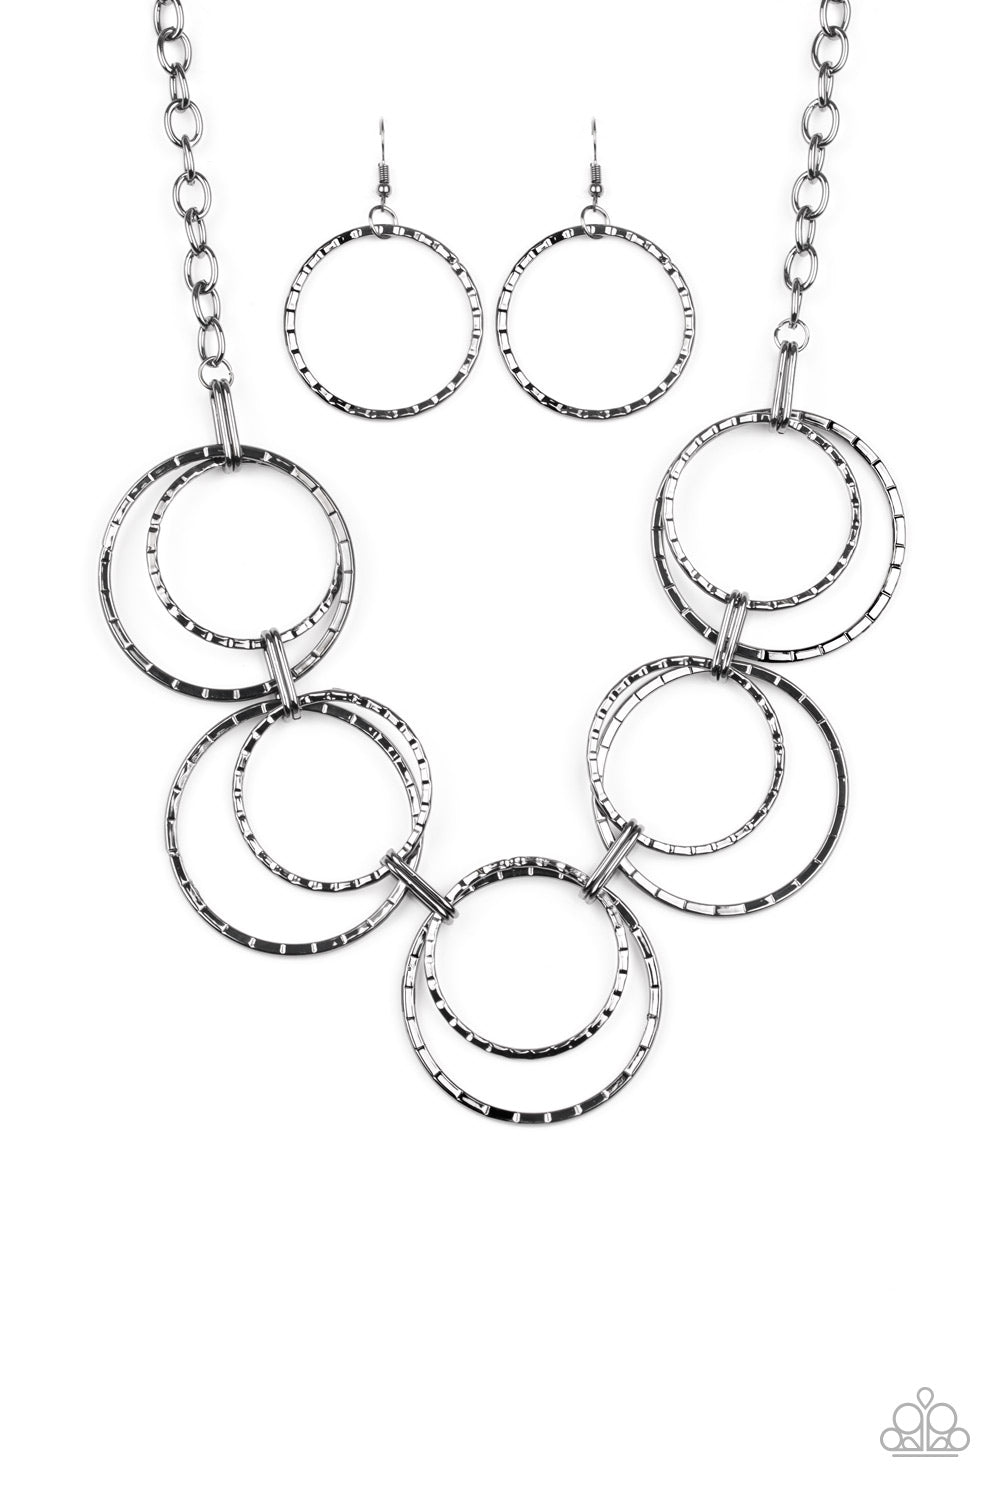 Radiant Revolution Black Necklace - Paparazzi Accessories. Etched in linear textures, pairs of oversized gunmetal hoops link below the collar for a dramatic industrial display. Features an adjustable clasp closure.  All Paparazzi Accessories are lead free and nickel free!  Sold as one individual necklace. Includes one pair of matching earrings.